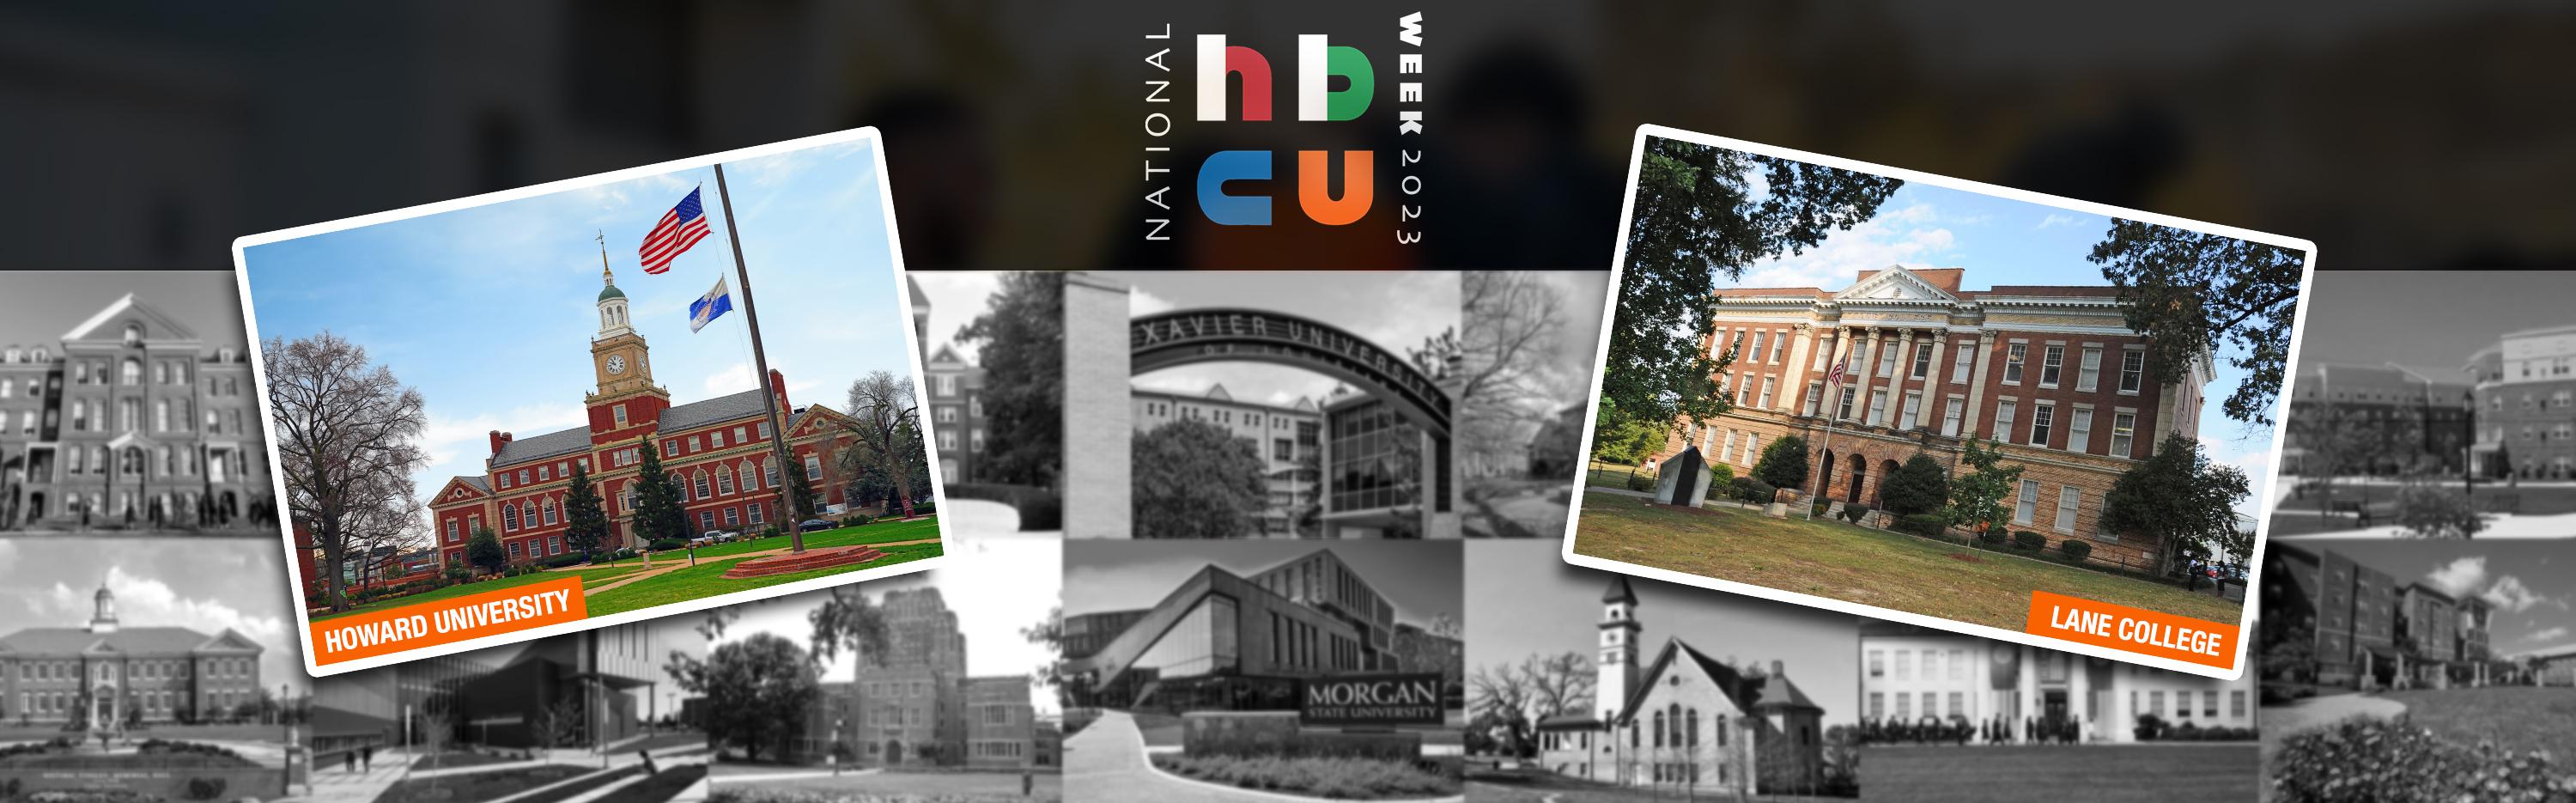 Collage of schools with HBCU logo